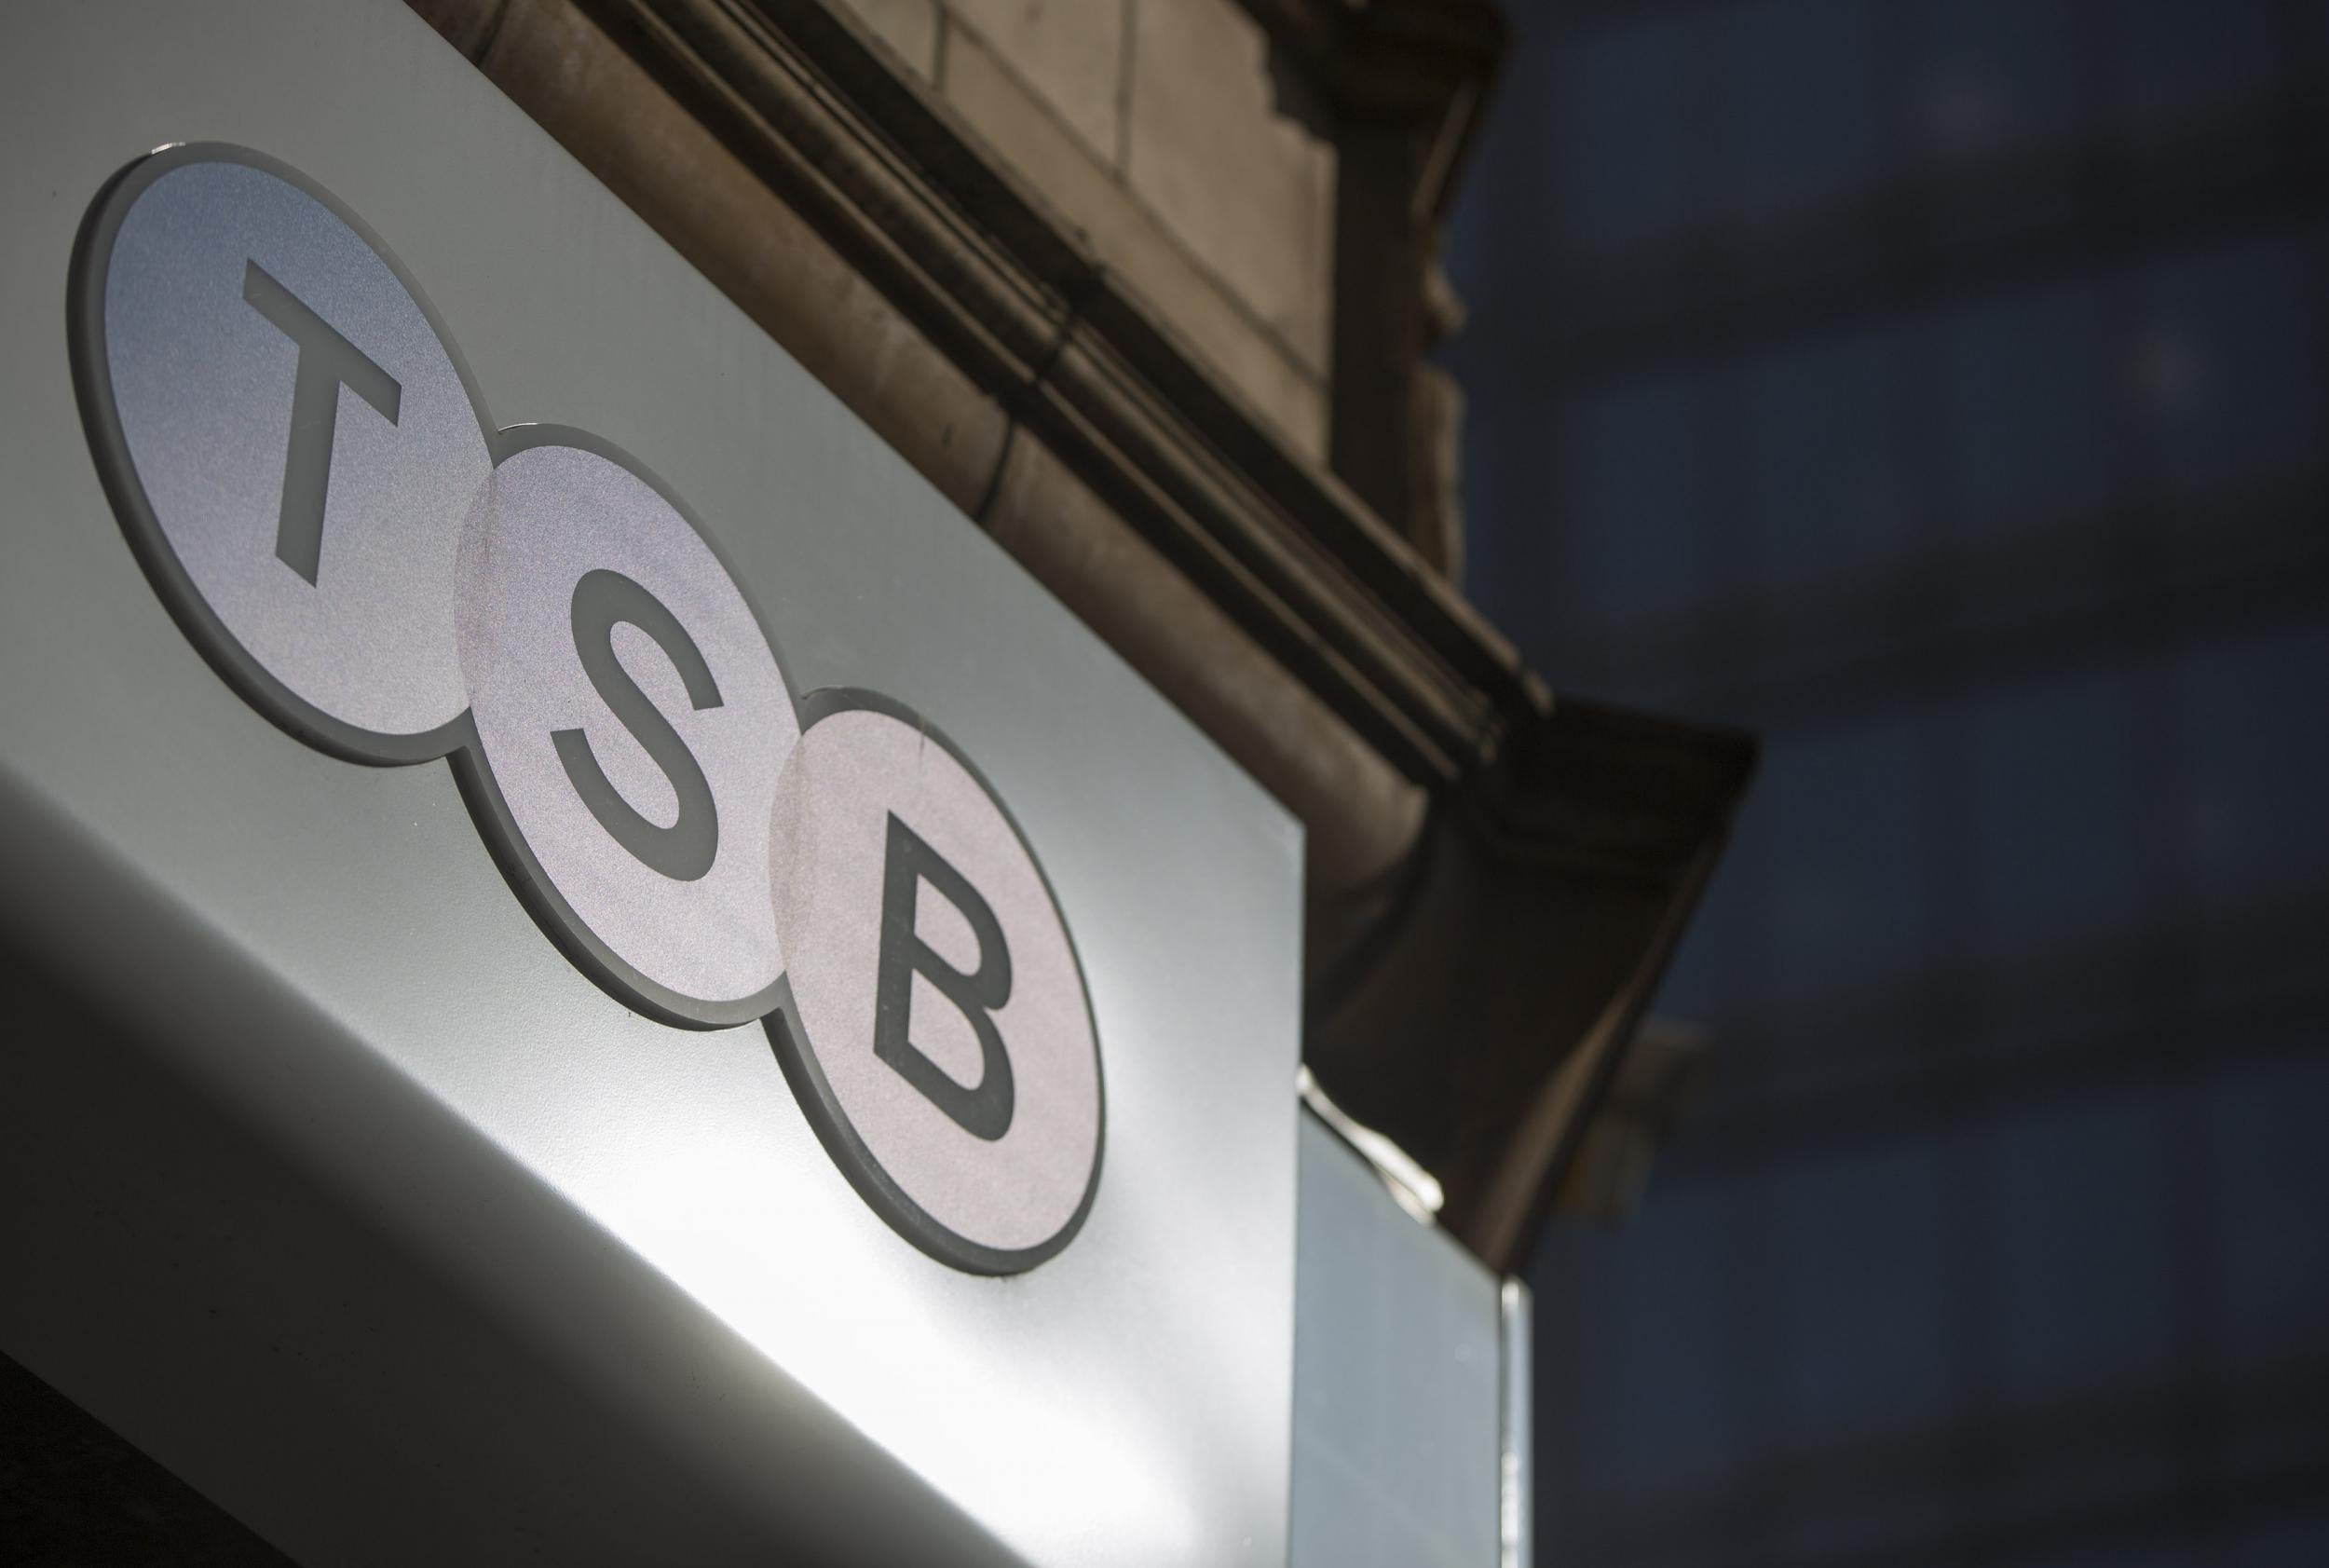 Latest failings come after up to 1.9 million TSB customers were locked out of online and mobile banking for several days in April